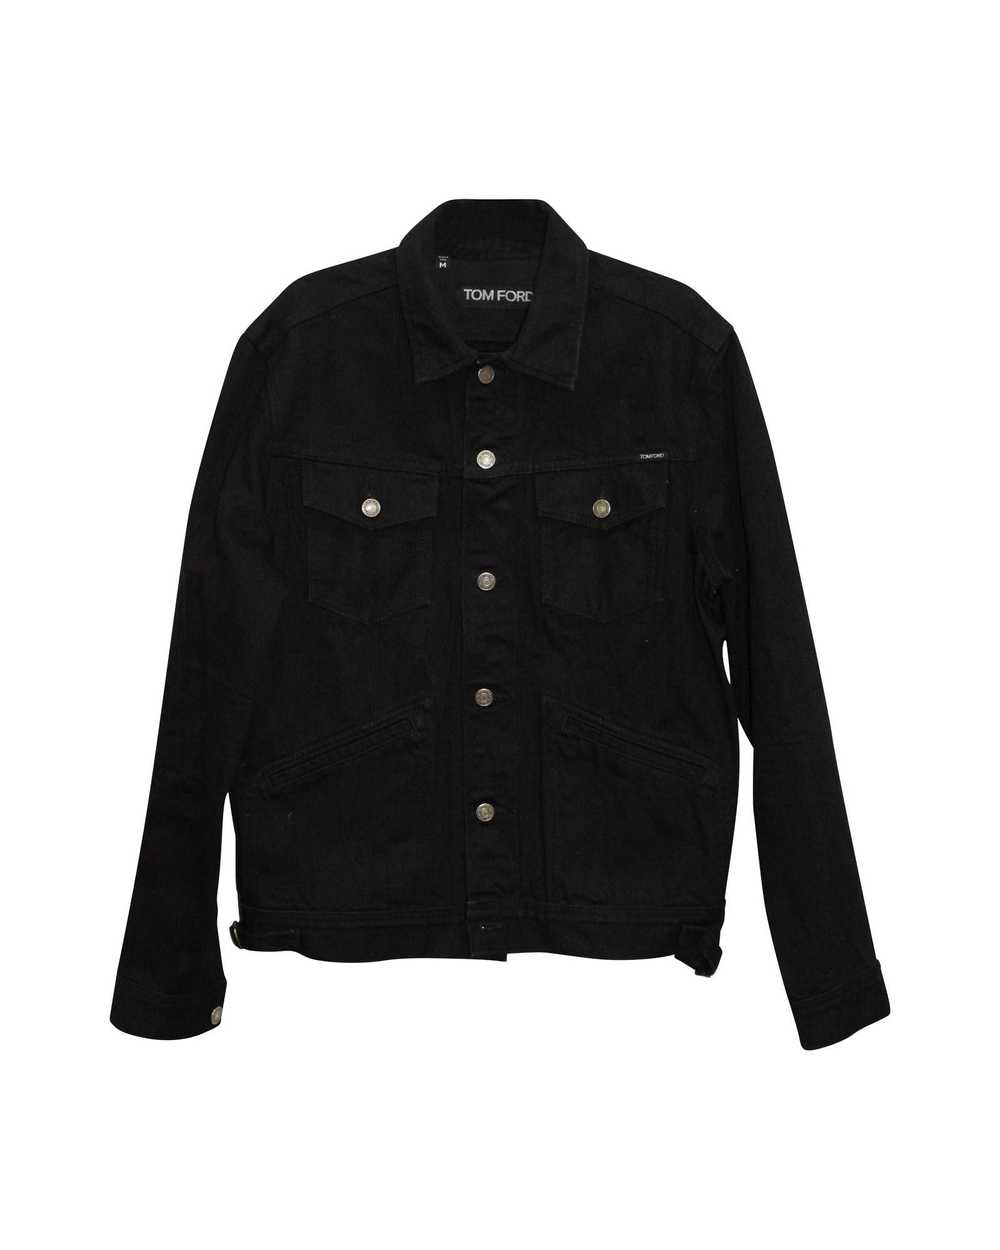 Tom Ford Authentic Selvedge Denim Jacket for Time… - image 1